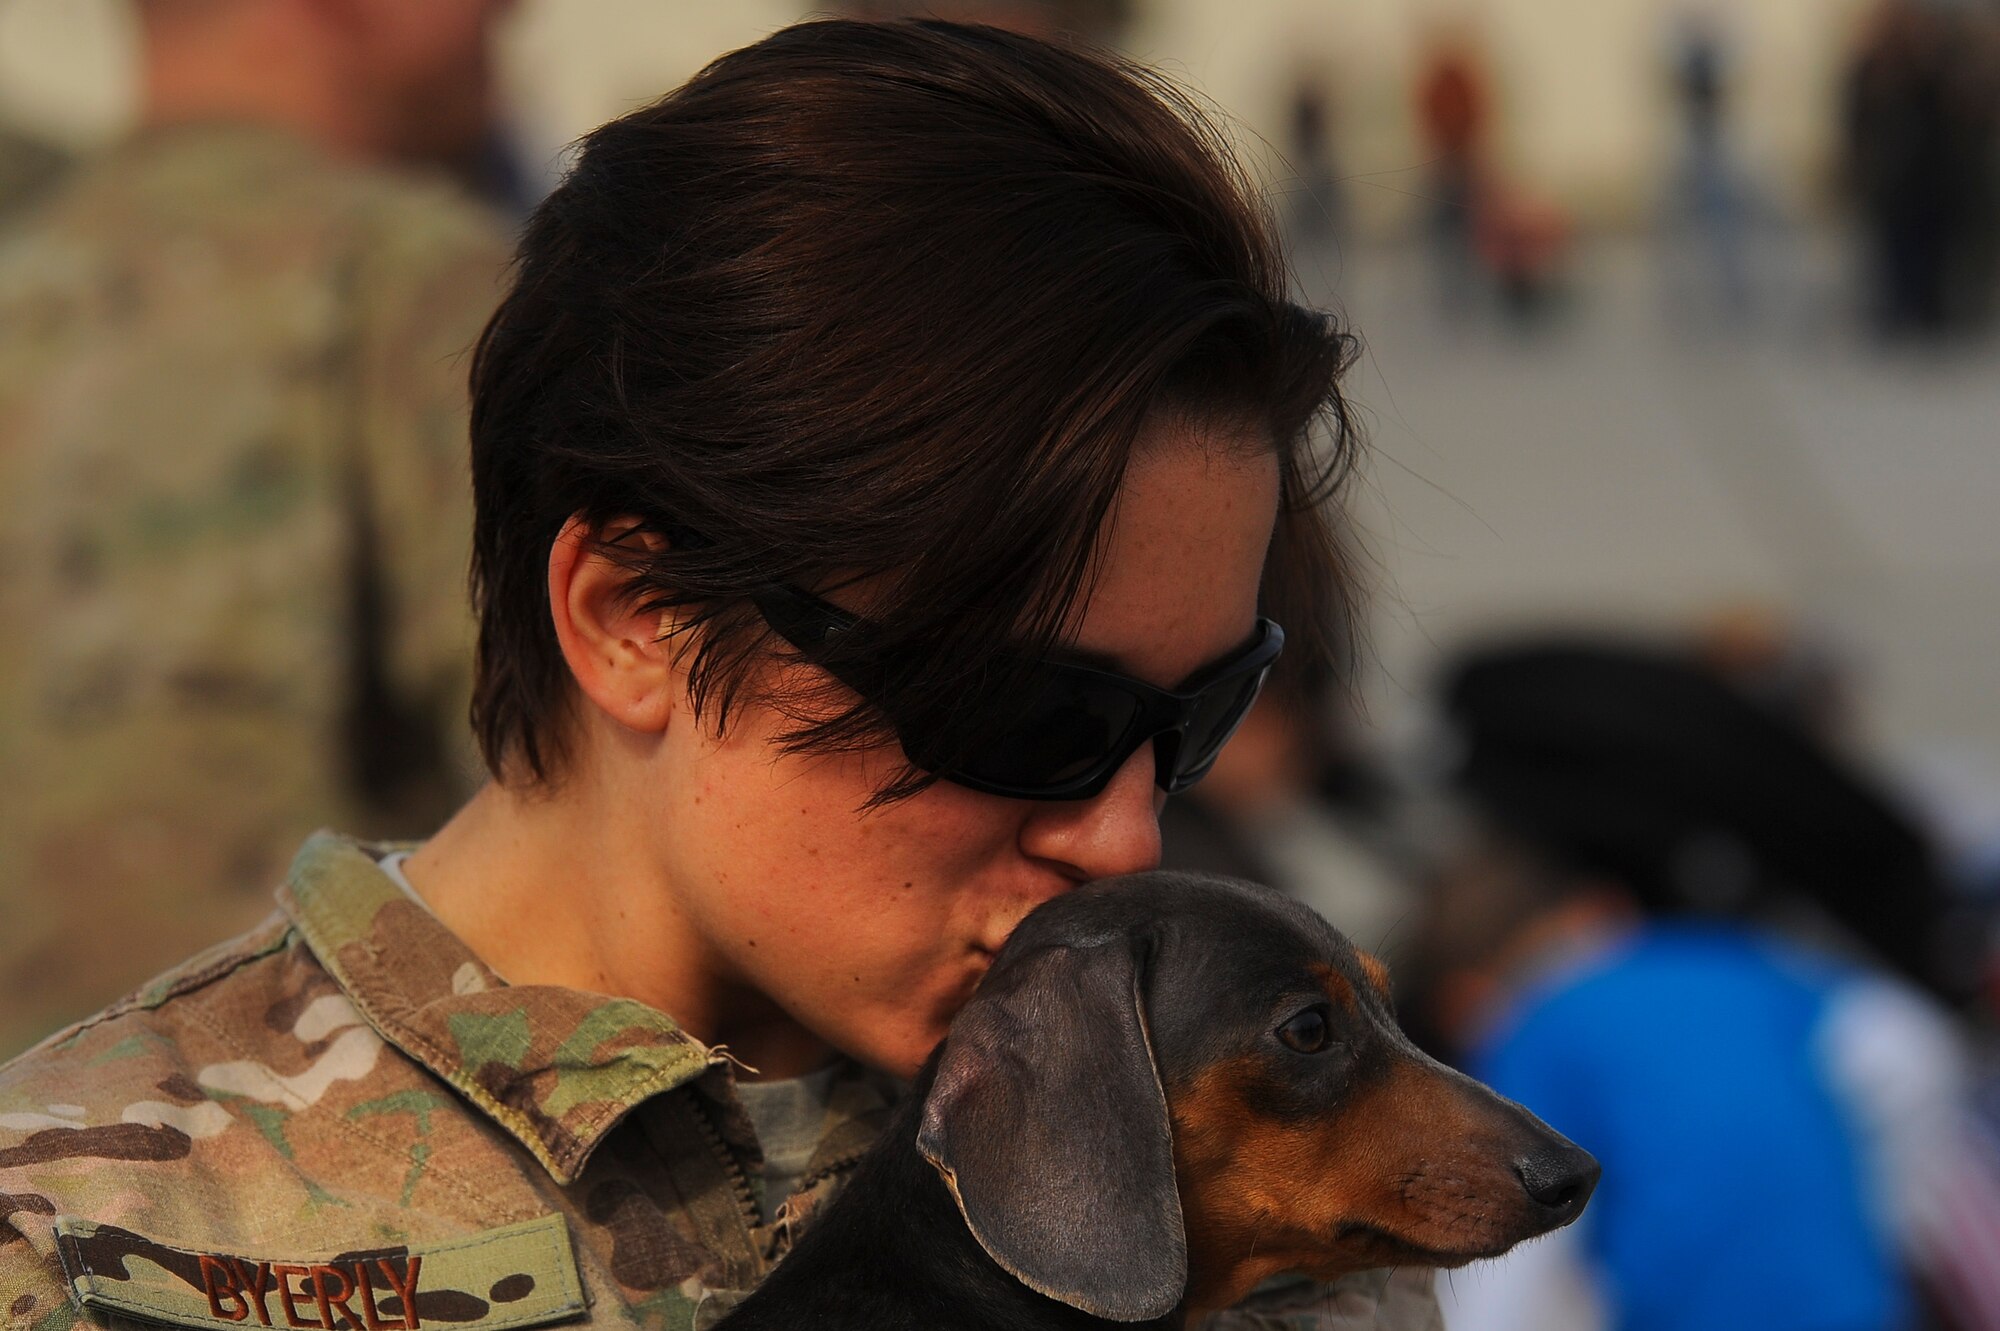 SPANGDAHLEM AIR BASE, Germany---Staff Sgt. Beriah Byerly, a 52nd Equipment Maintenance Squadron munitions systems crew chief, kisses her dog Lola after returning home from a deployment Sept. 21, 2013. Byerly was one of more than 185 Airmen that support combat operations in Southwest Asia. (U.S. Air Force photo by Senior Airman Rusty Frank/Released)